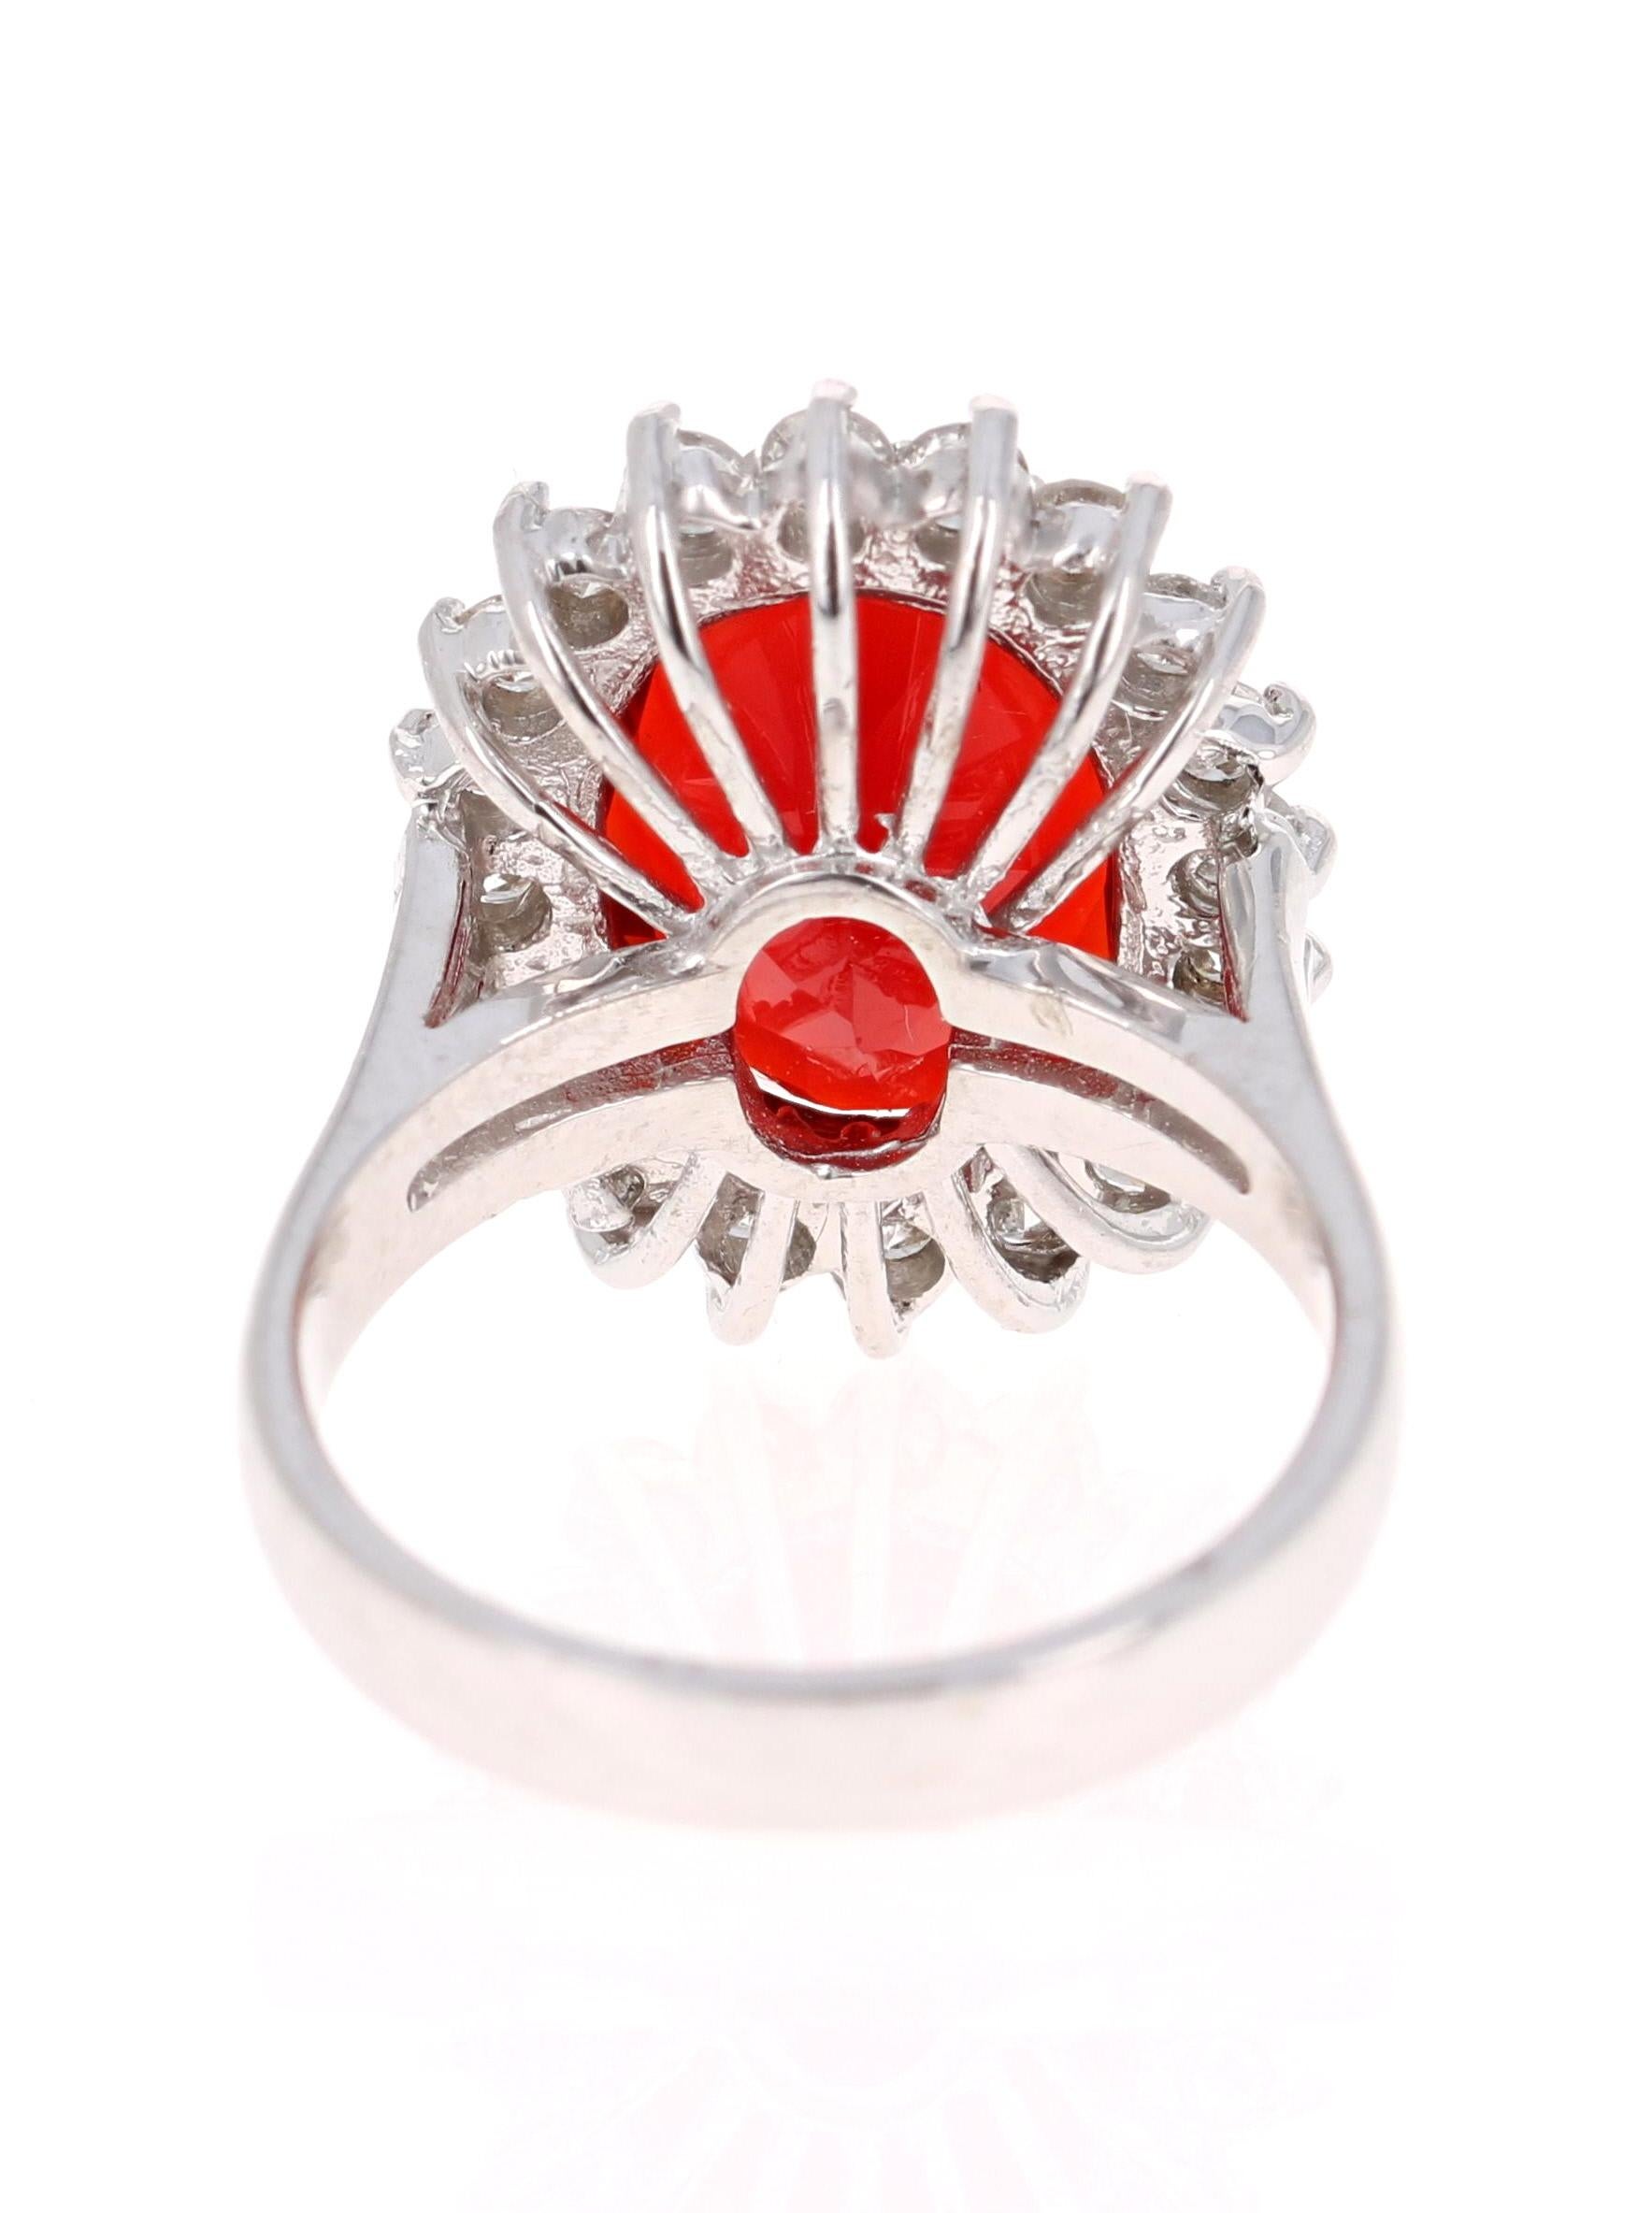 Contemporary 3.92 Carat Fire Opal Diamond White Gold Cocktail Ring For Sale